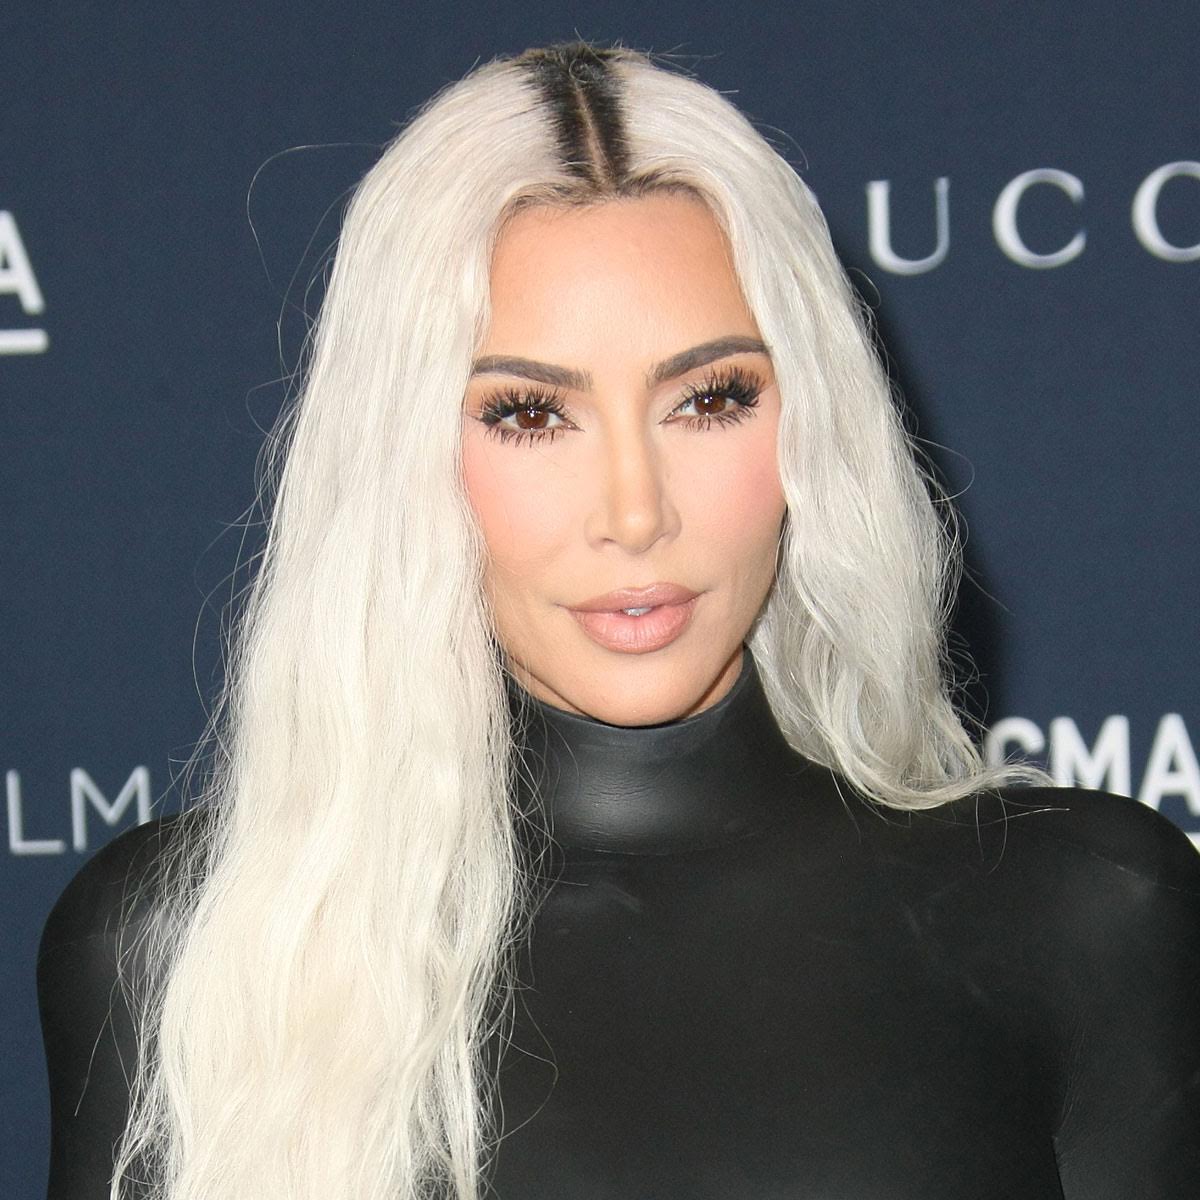 Kim Kardashian Is Wearing Balenciaga Again After Fashion House's Ad  Controversy Involving Depictions of Children - SHEfinds